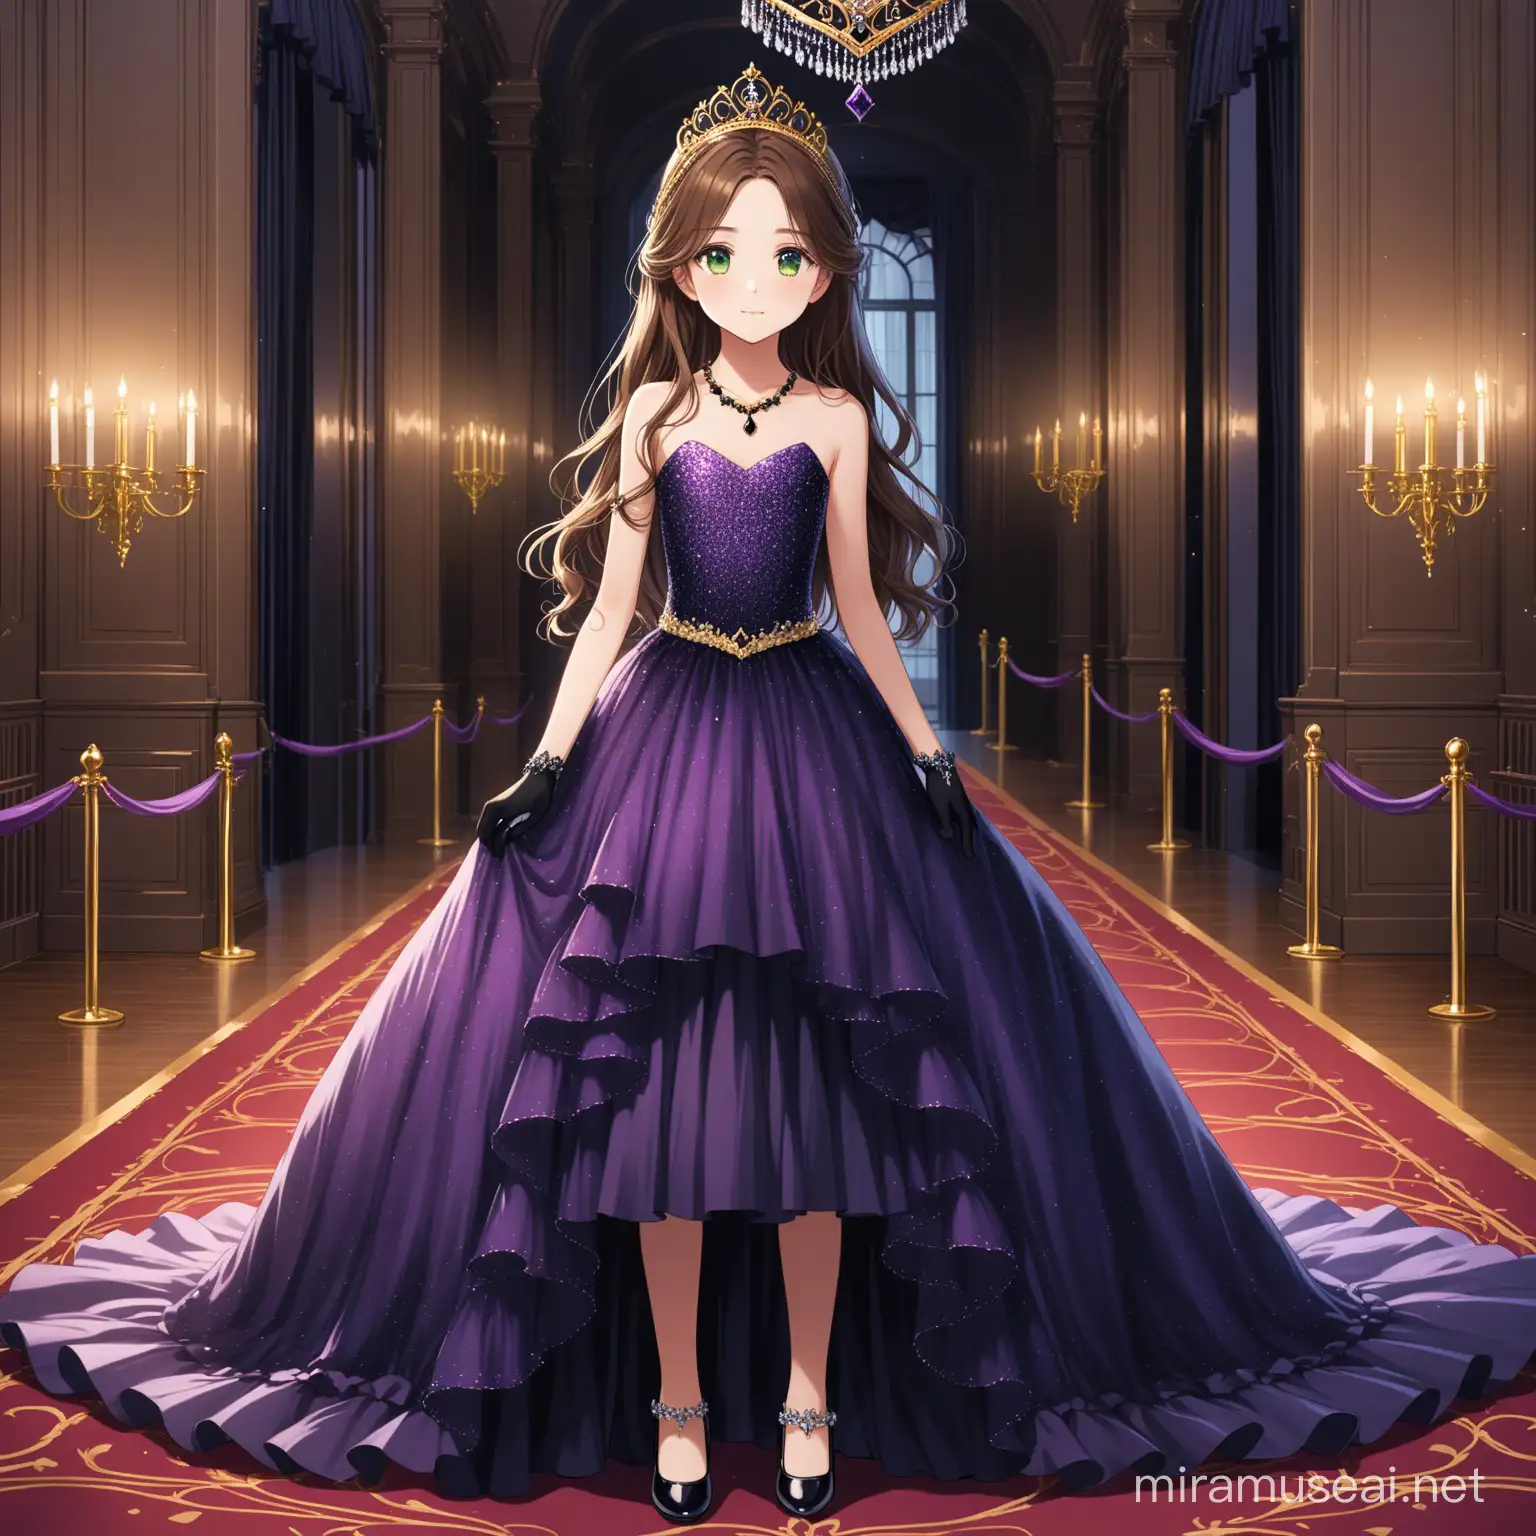 Elegant 11YearOld Girl in Ball Gown and Tiara at Grand Mansion